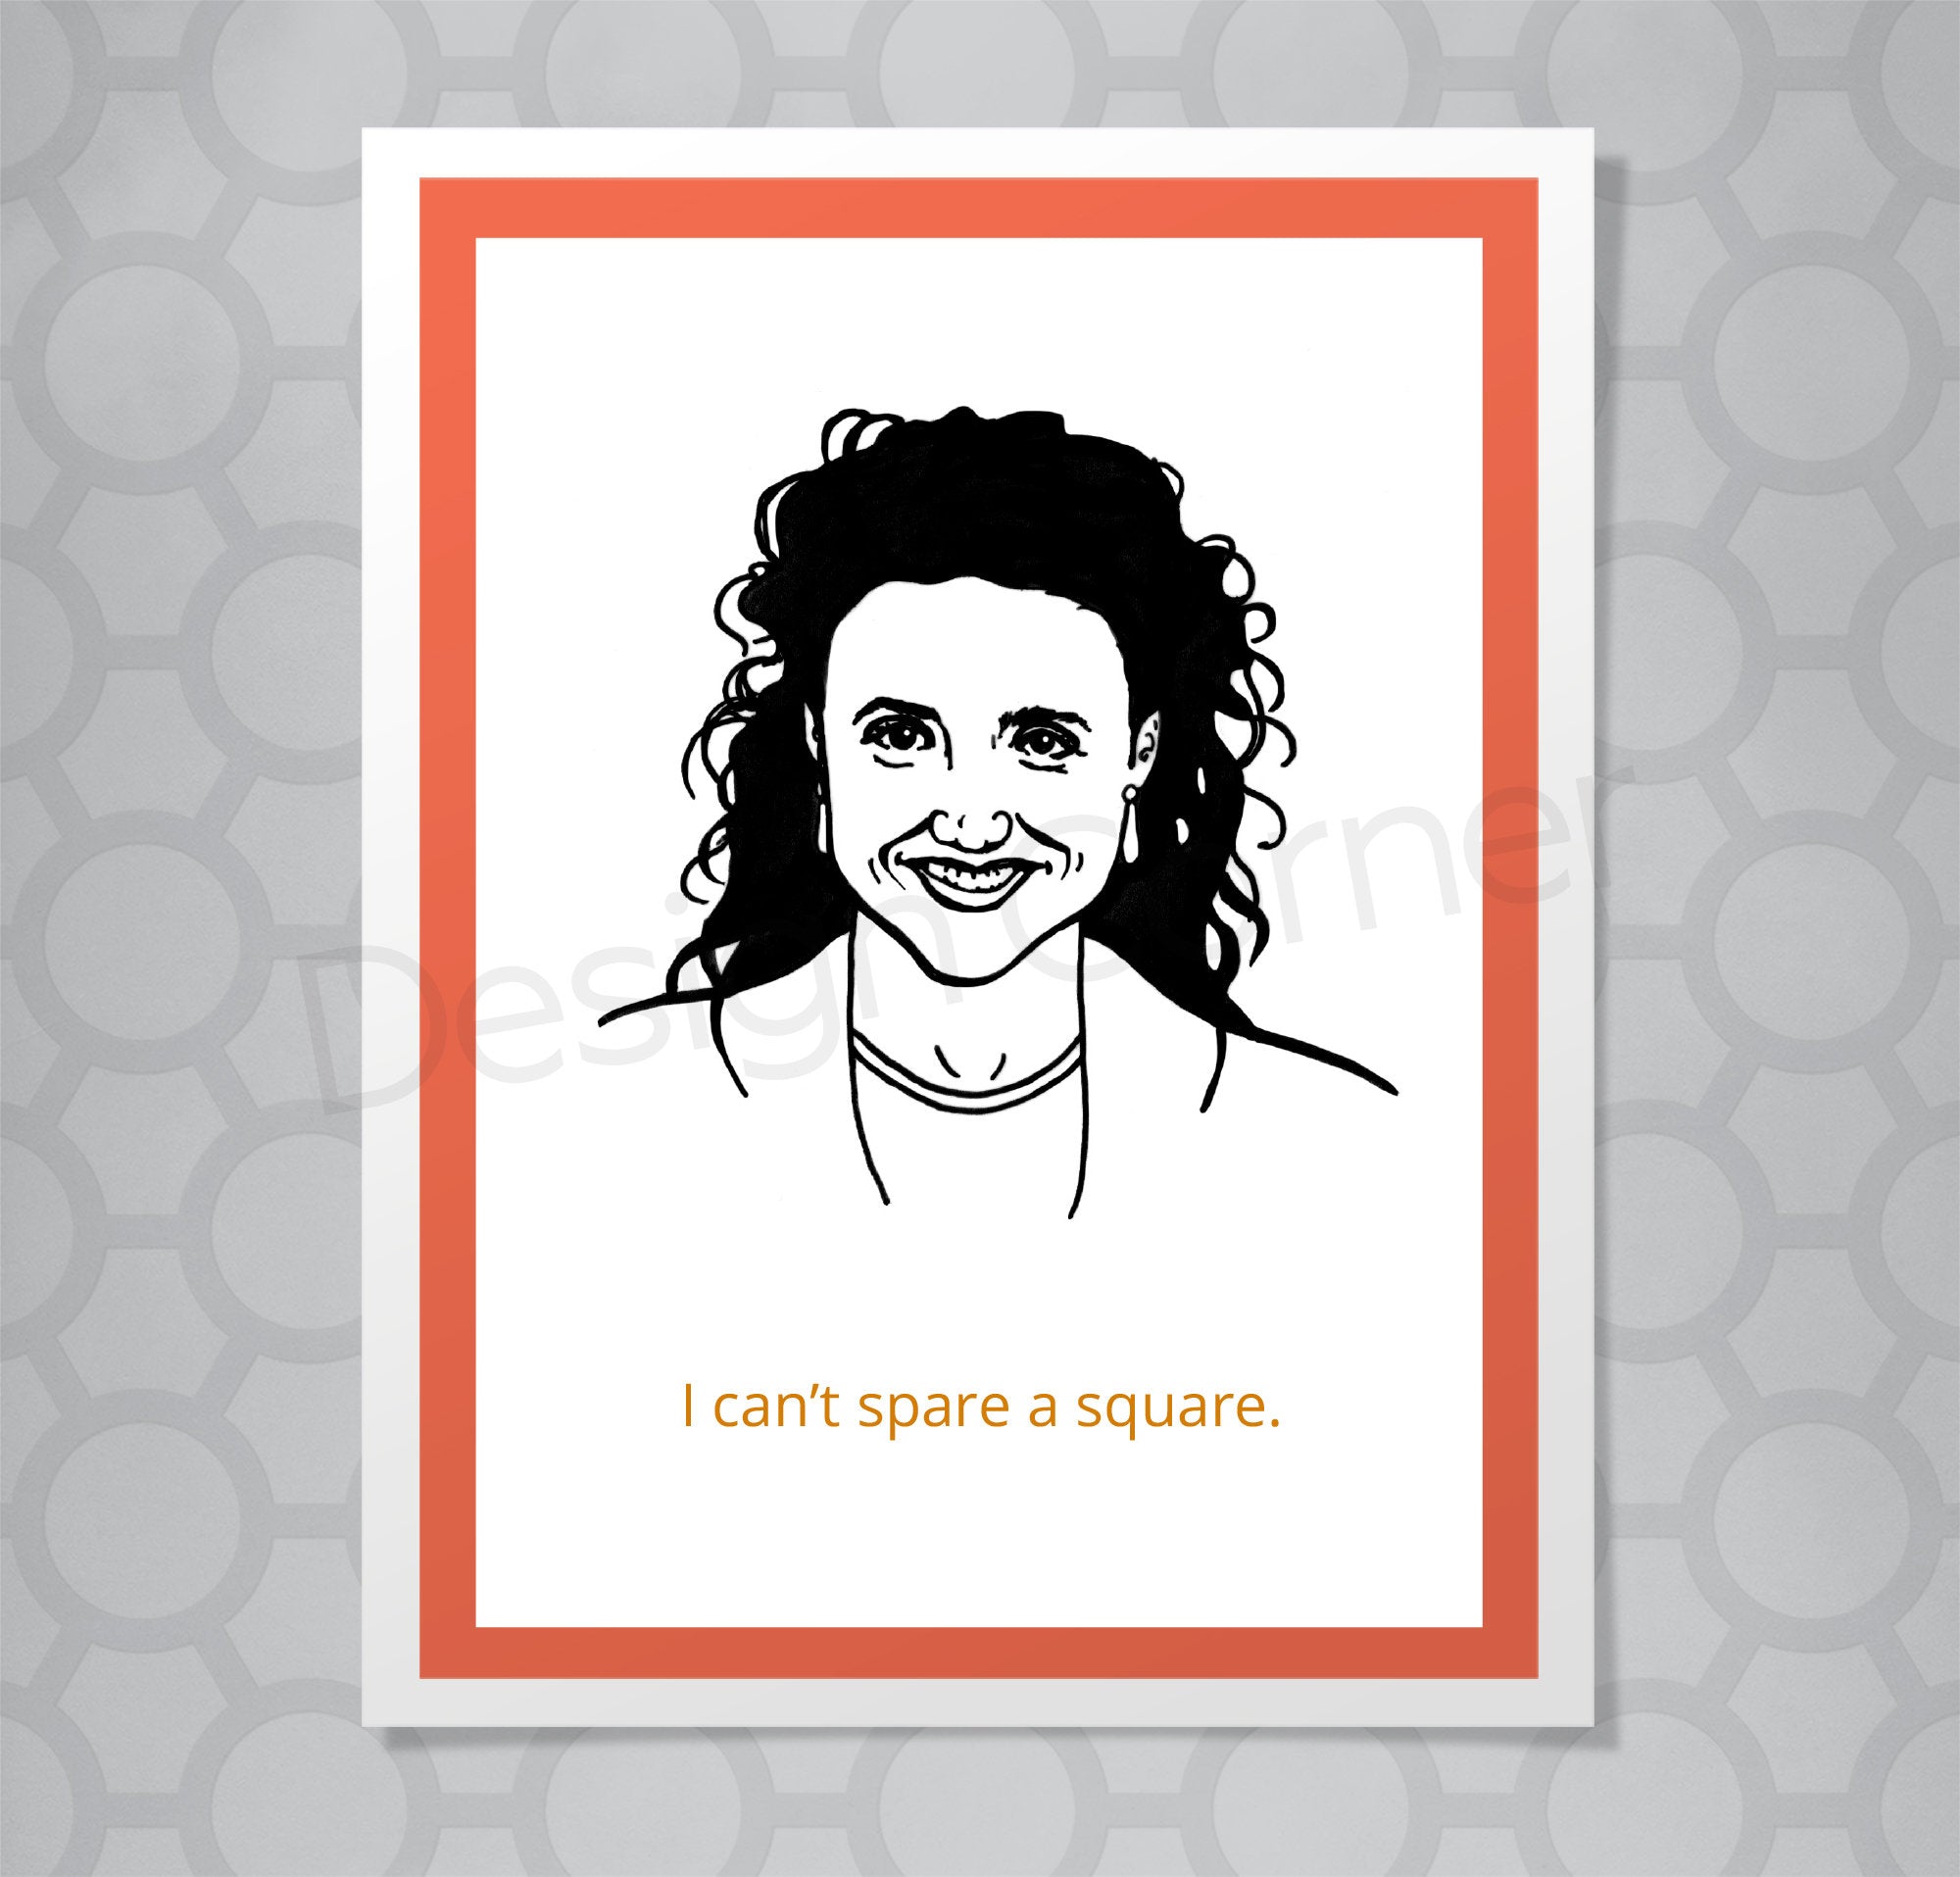 Greeting card with illustration of Seinfeld's Elaine. Caption says "I can't spare a square."